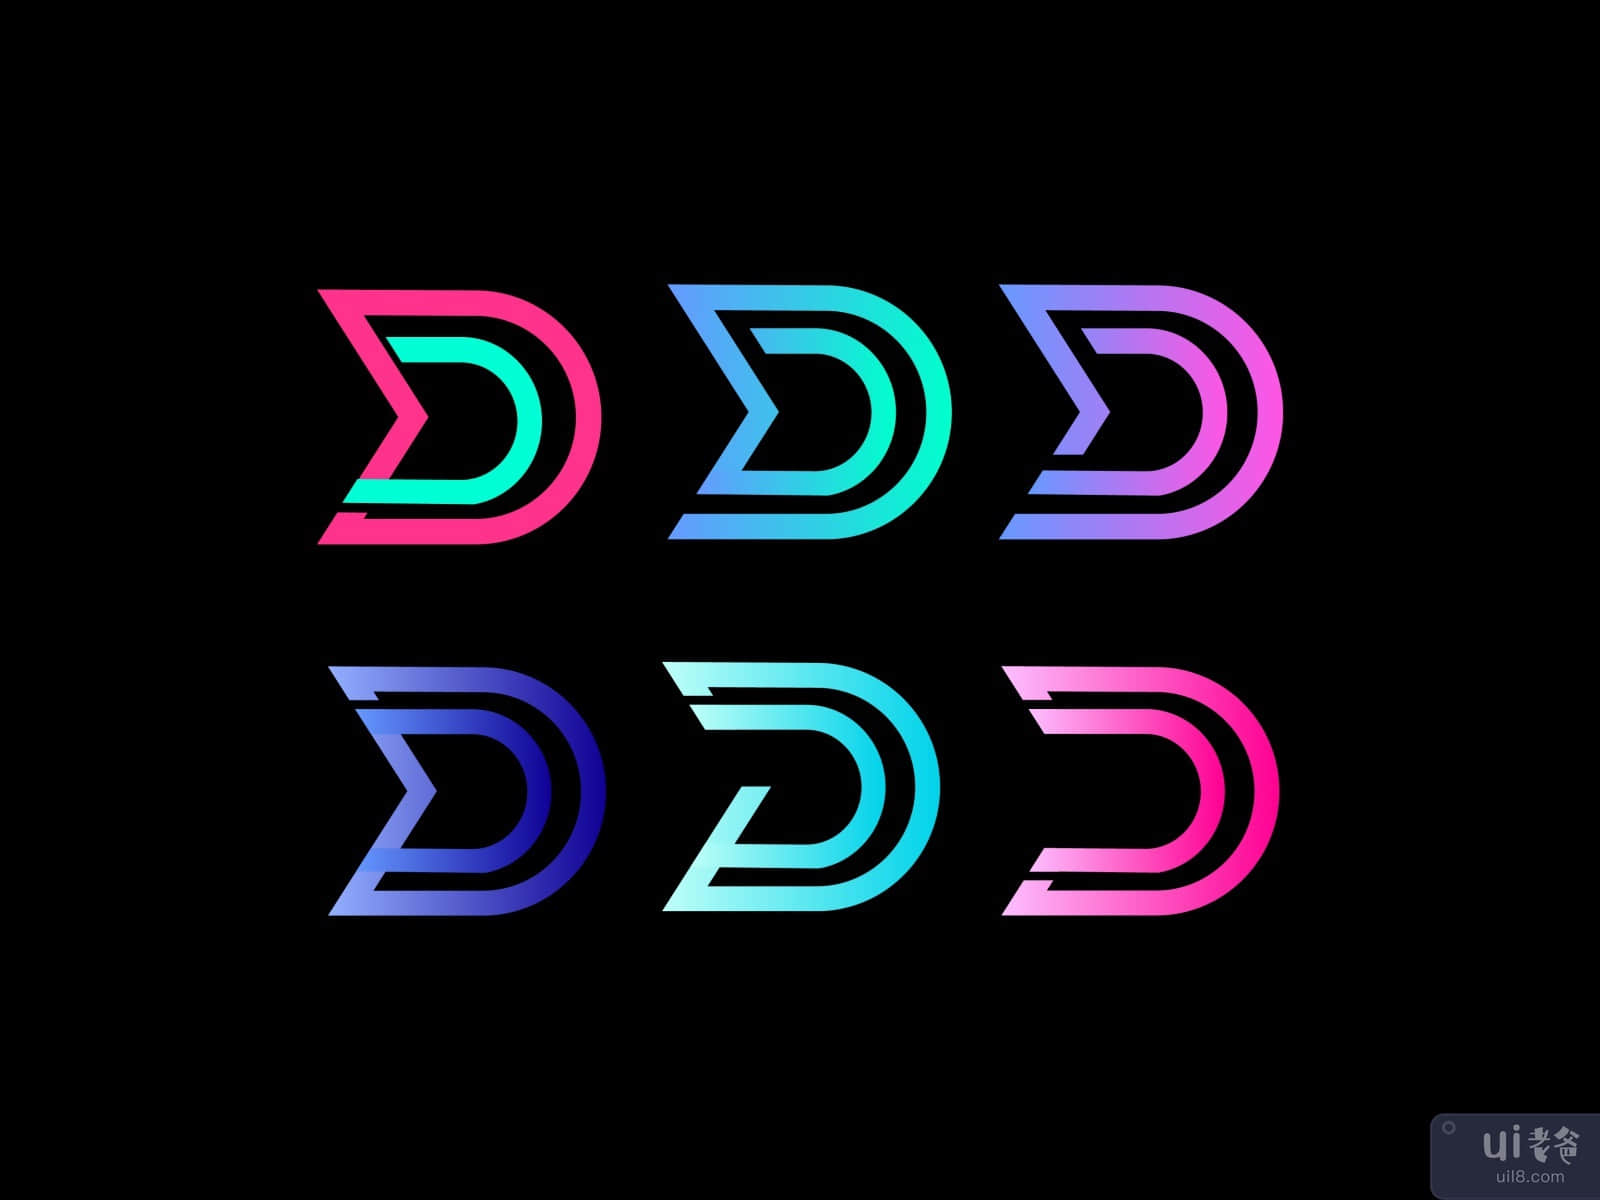 D C AND G LATTER LOGO CONCEPT 01